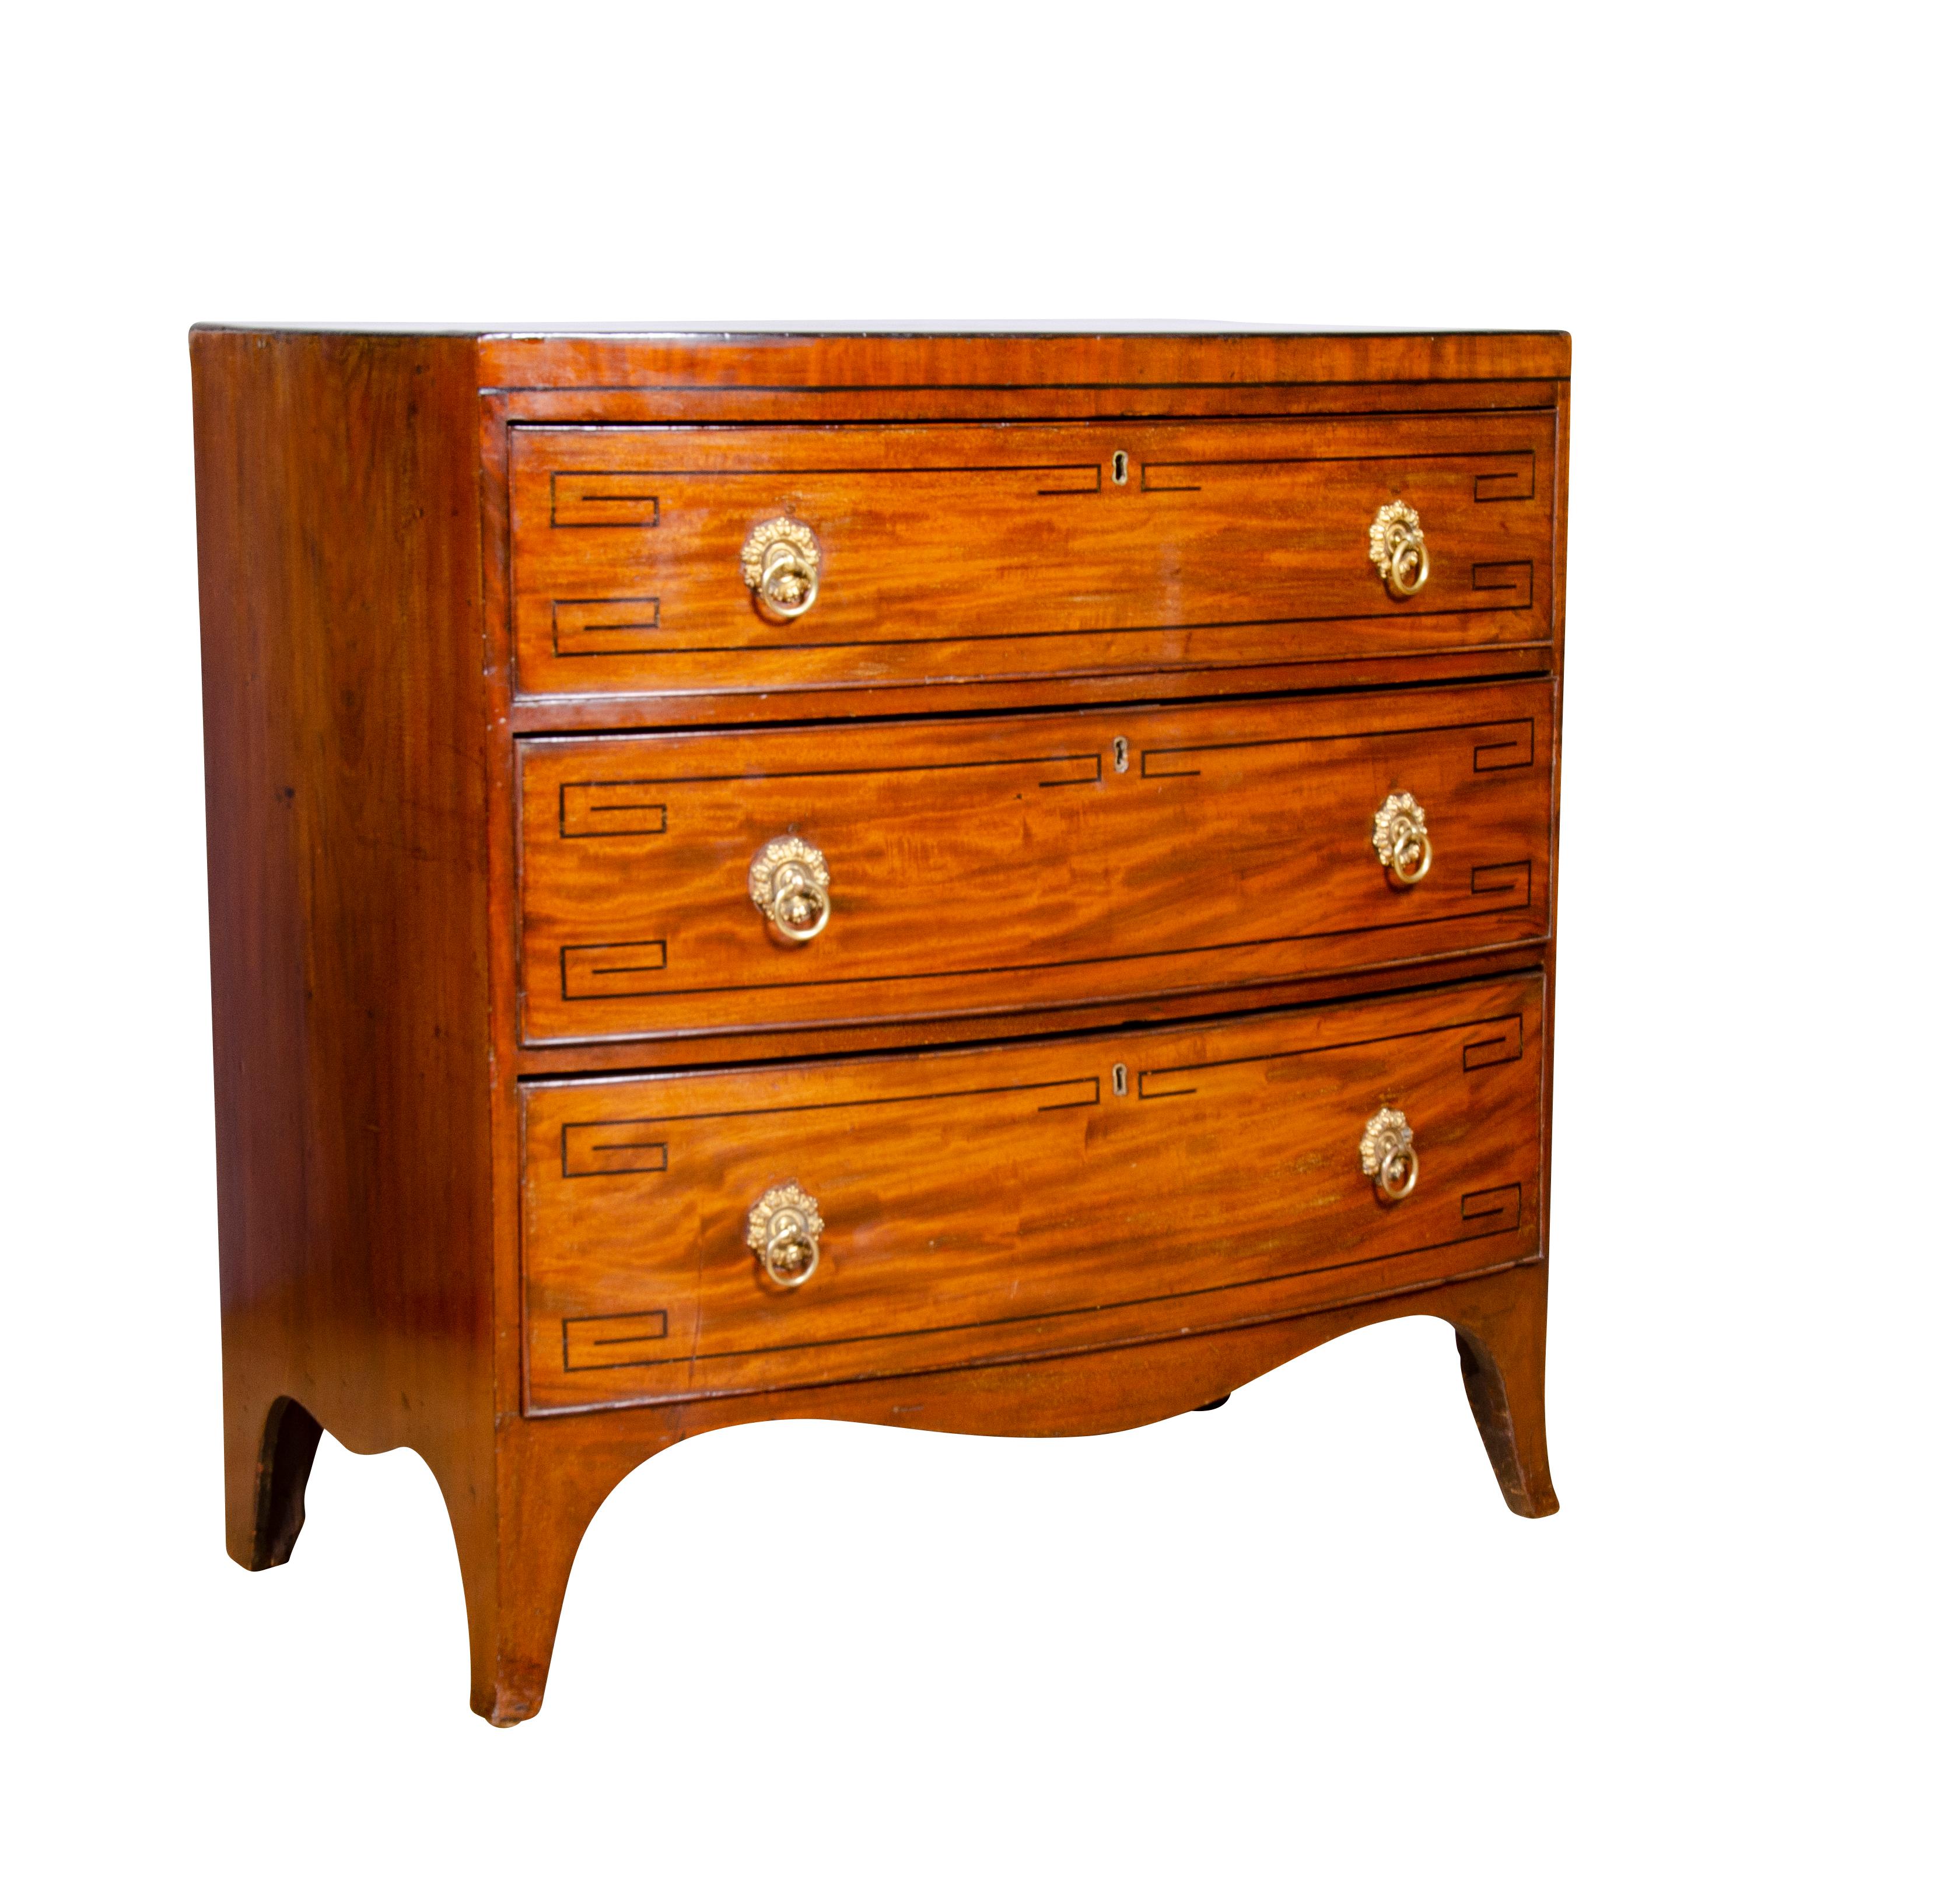 English Regency Mahogany and Ebony Inlaid Bow Front Chest of Drawers